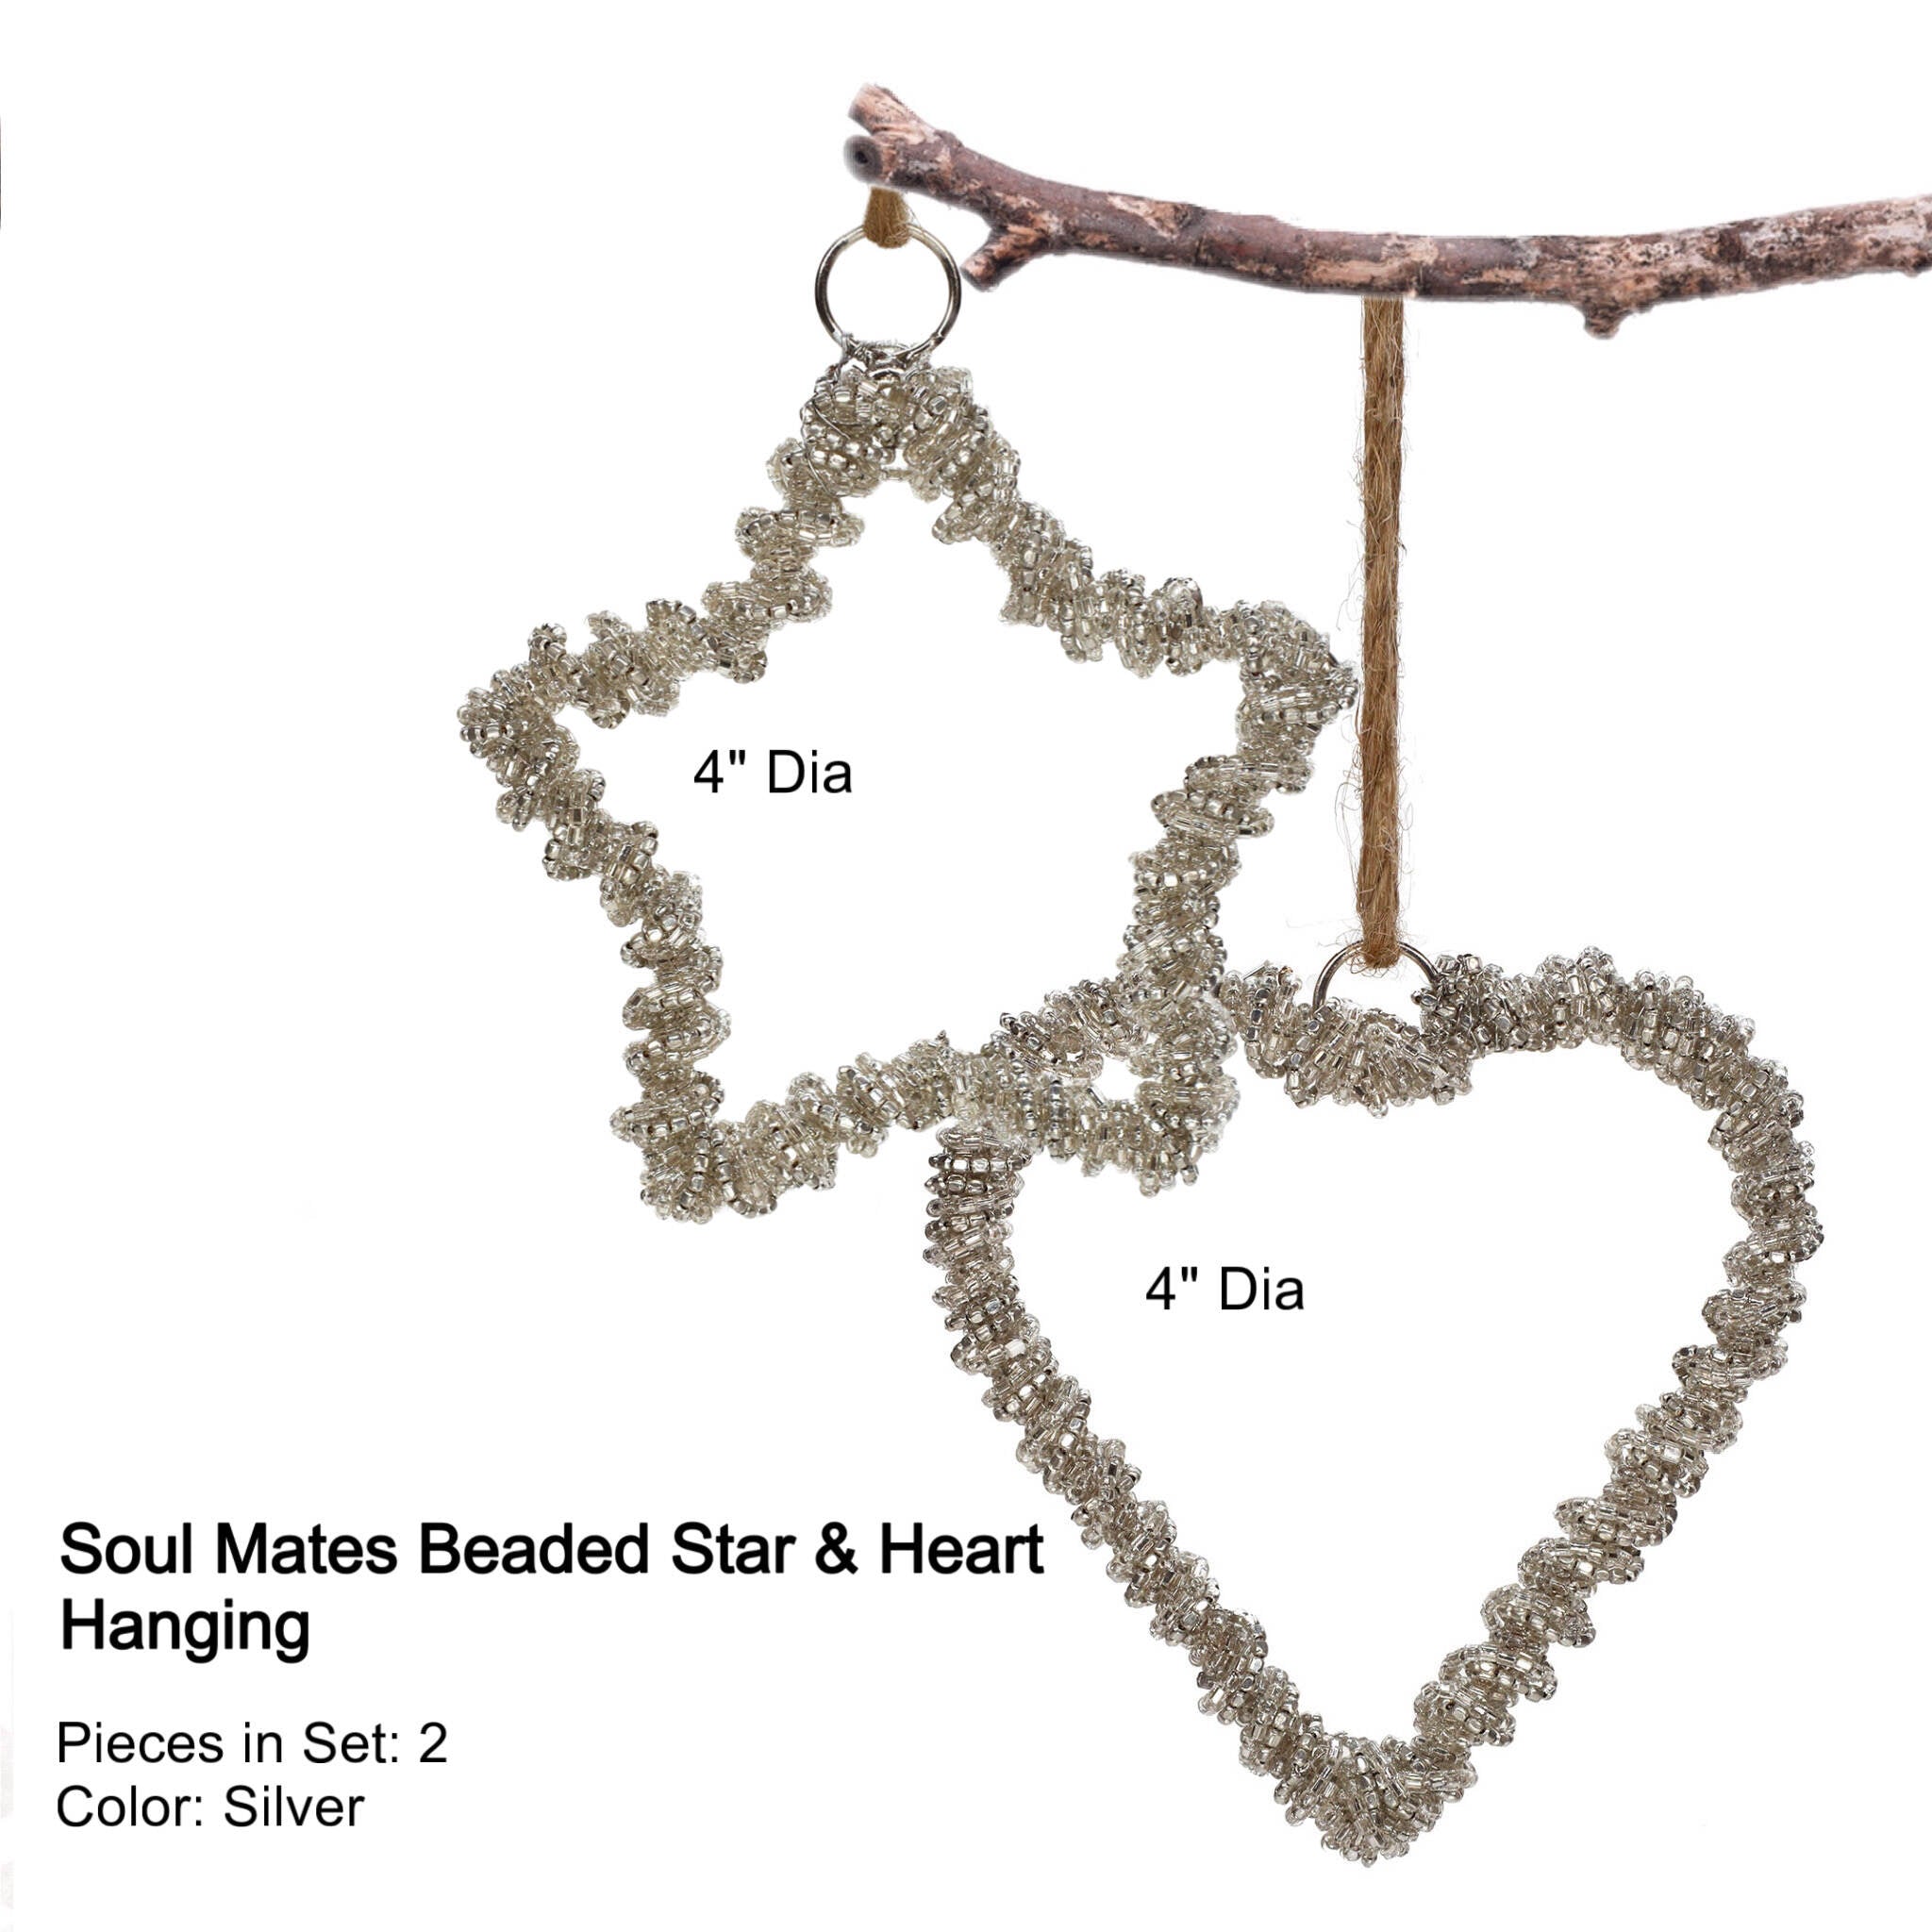 Soul Mates Beaded Star & Heart Hanging in Silver, Set of 2